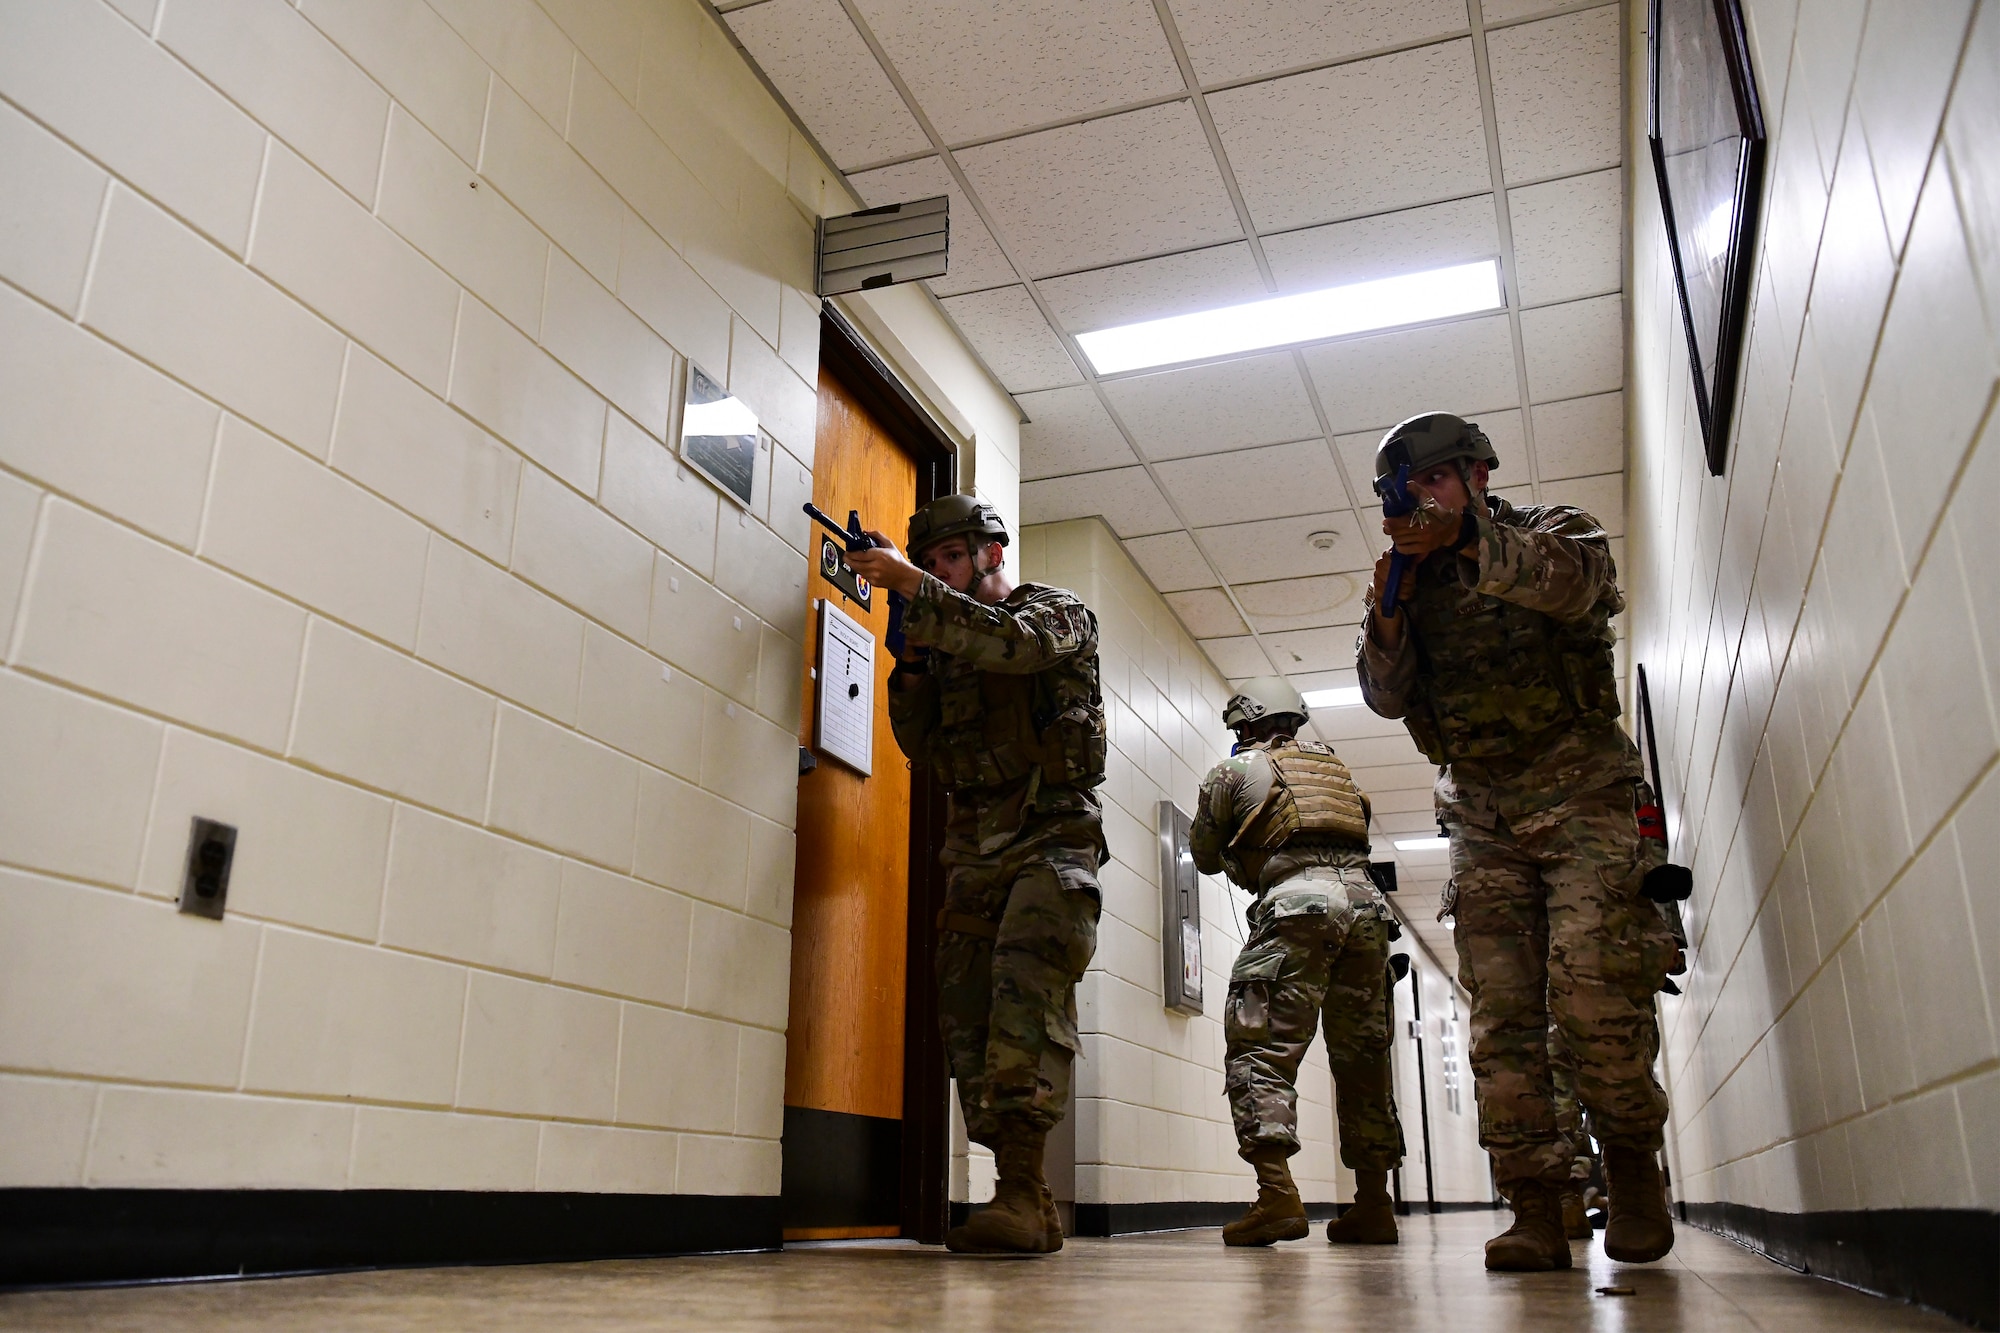 Airmen search a building during training.